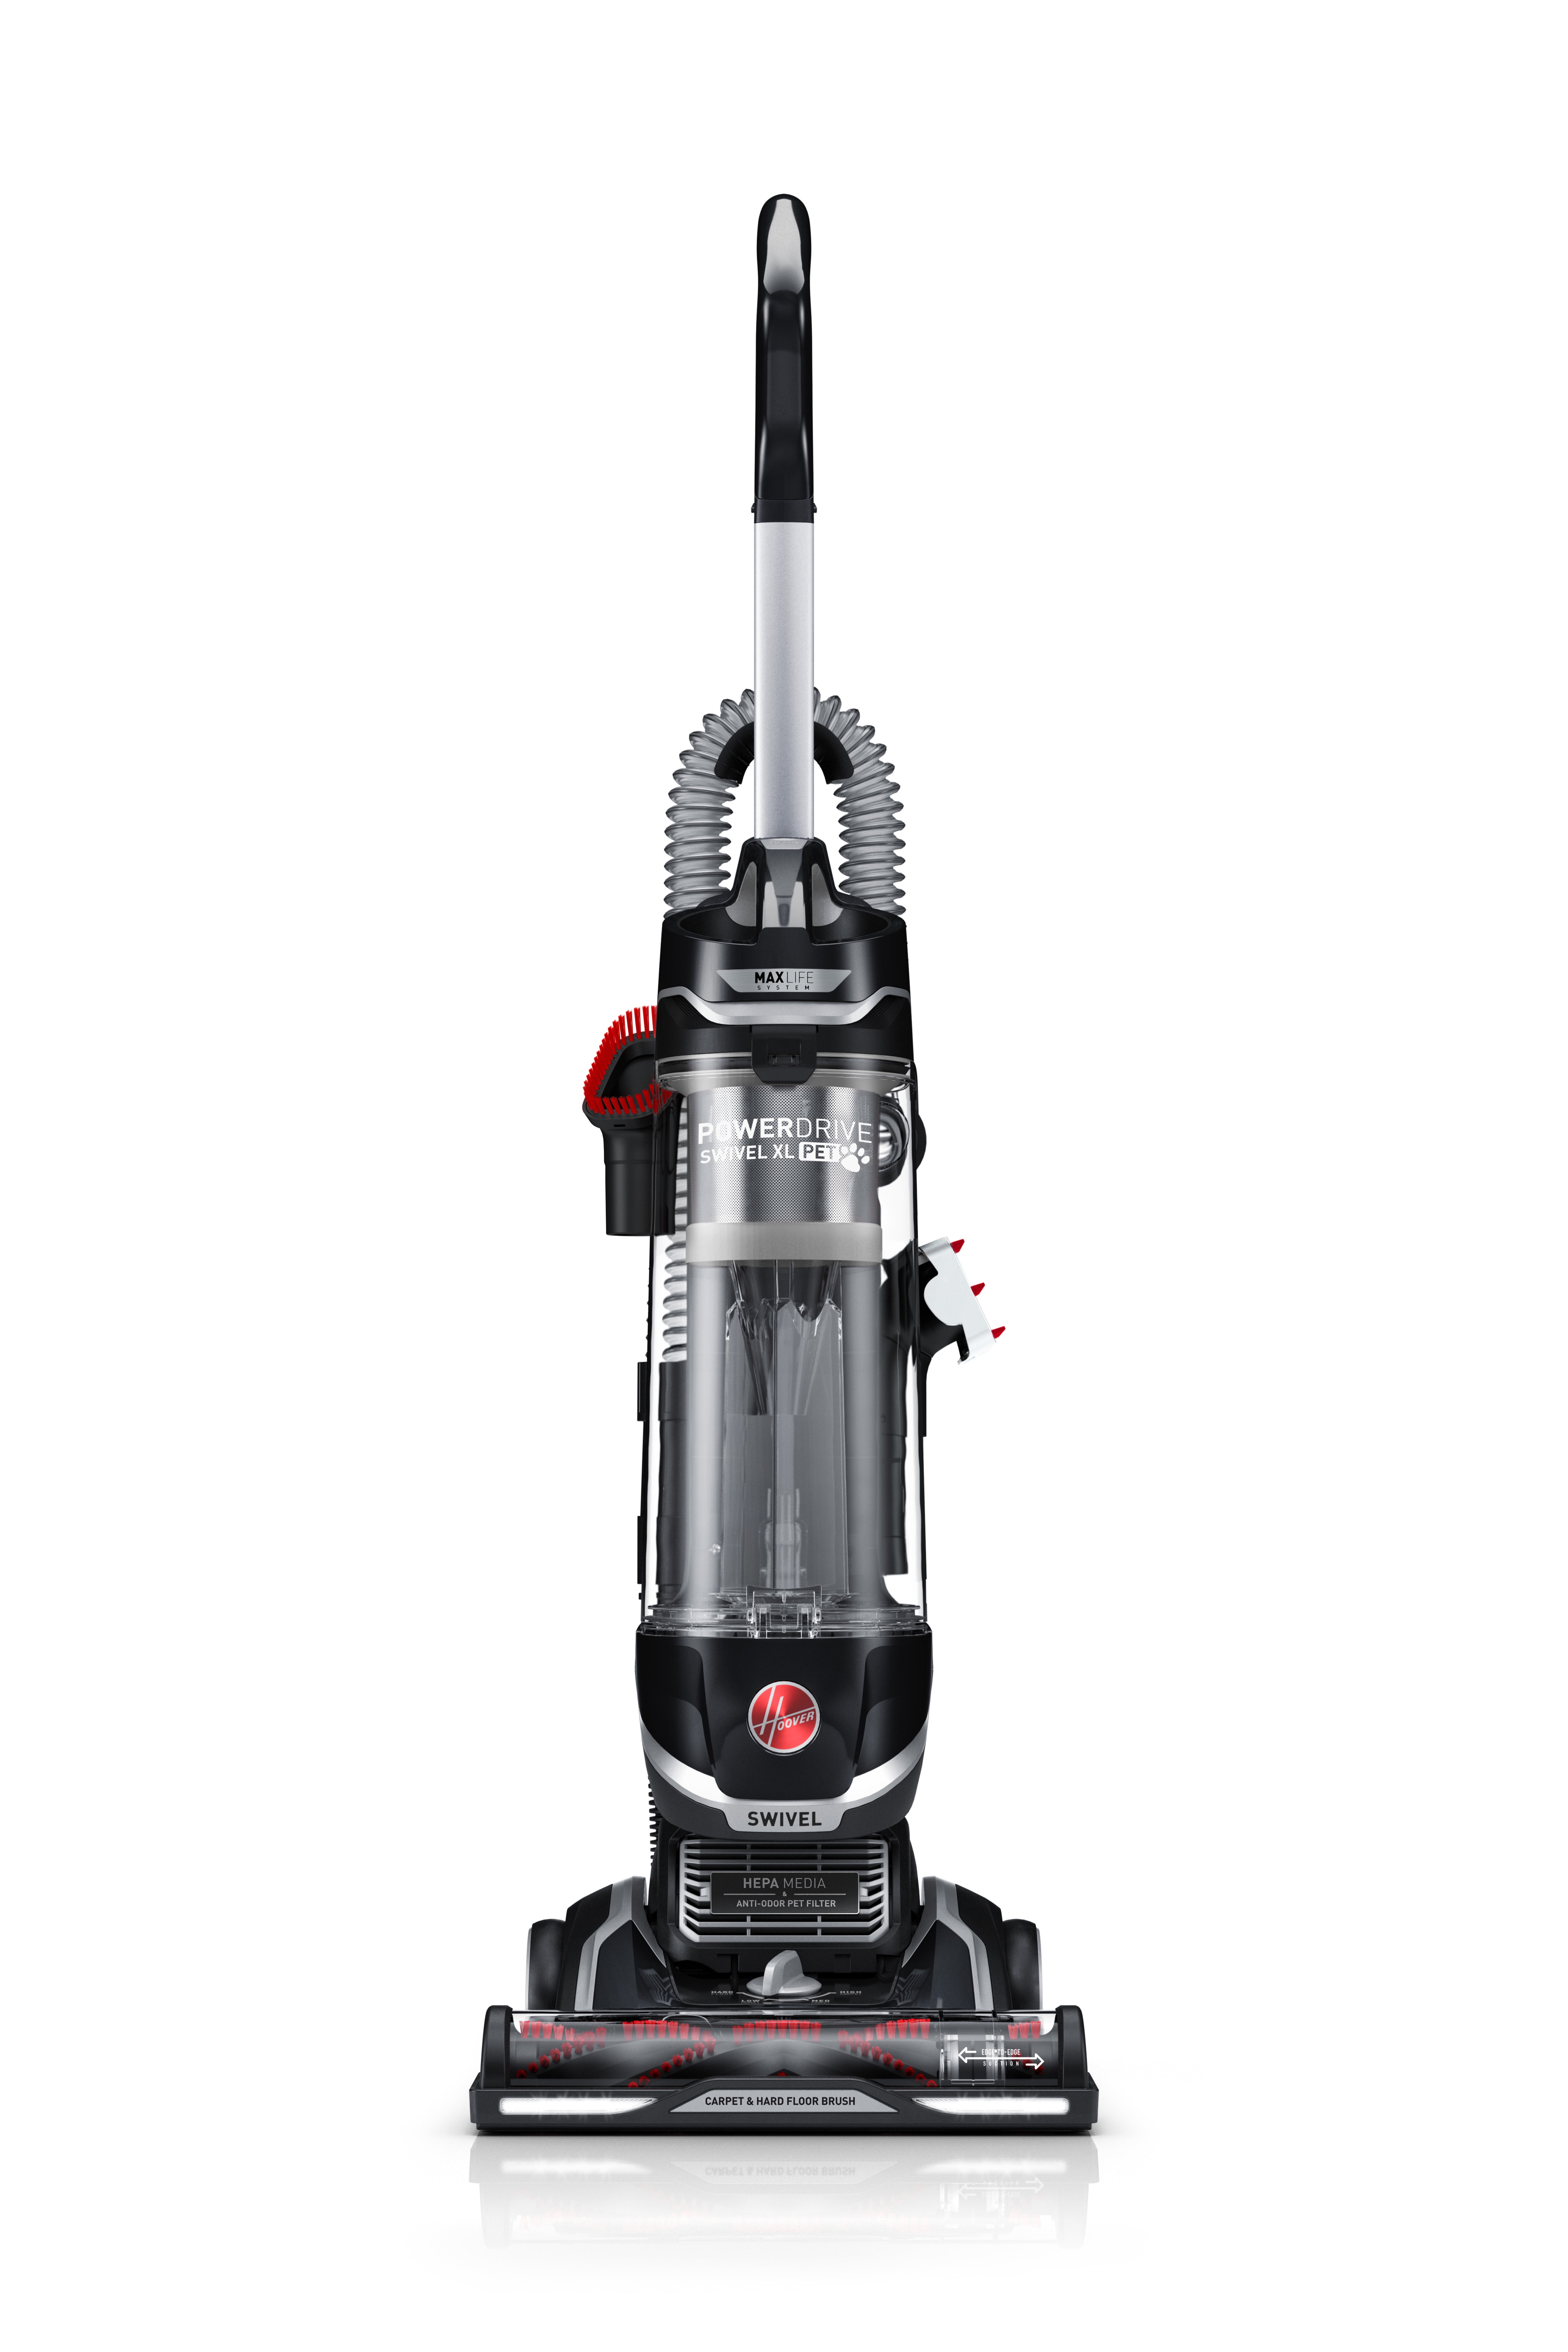 Hoover MAXLife Power Drive Swivel XL Pet Bagless Upright Vacuum Cleaner  with HEPA Media Filtration, UH75210, New